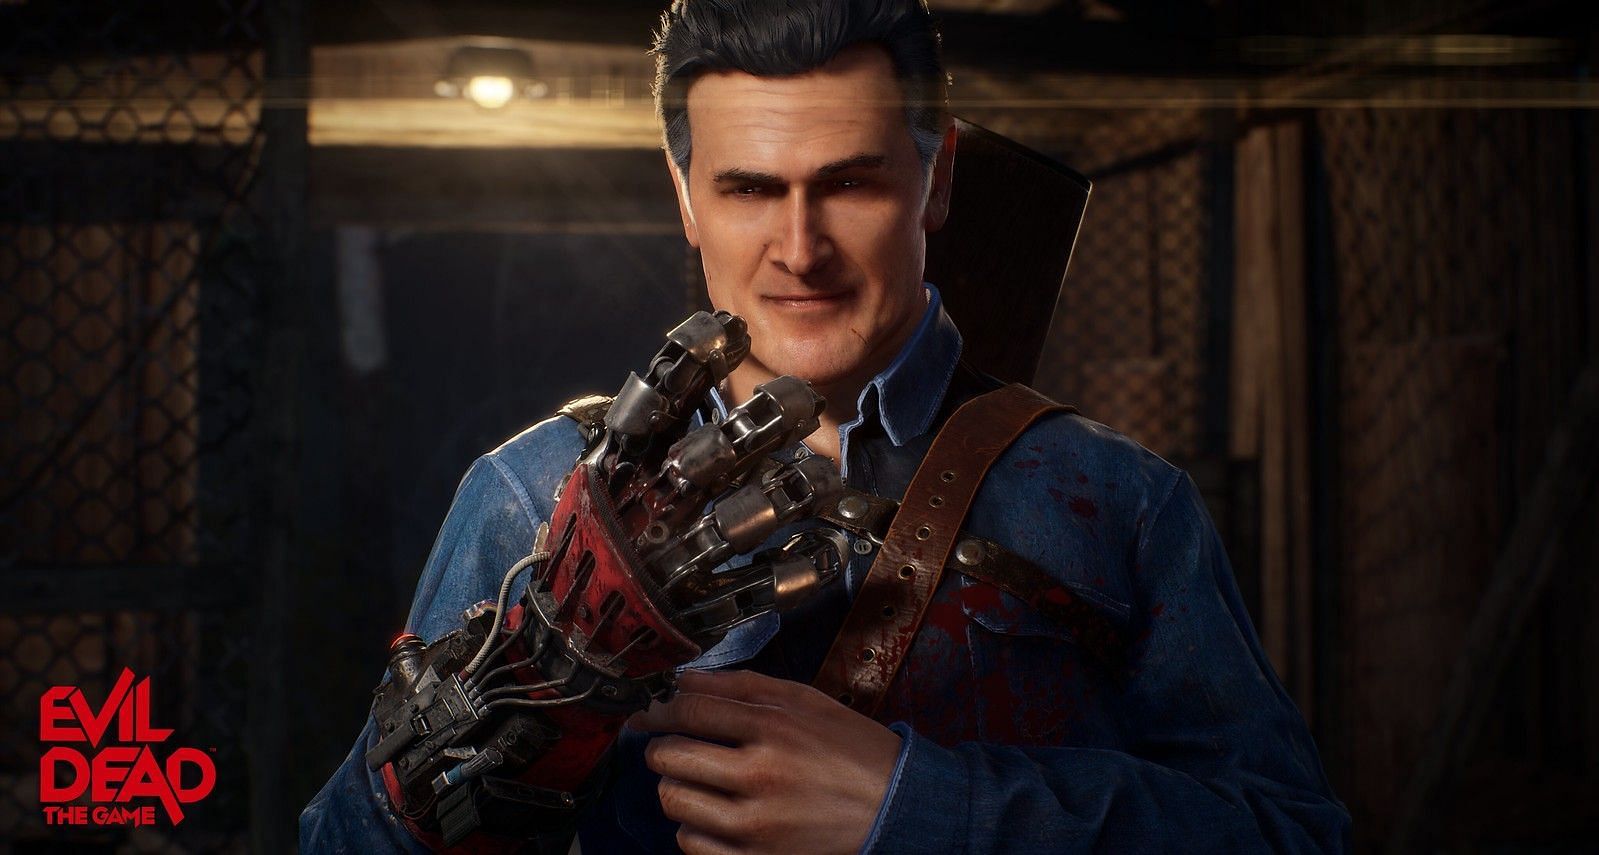 Evil Dead: The Game can feel a bit cartoony and less scary a lot of the time (Image via Saber Interactive)